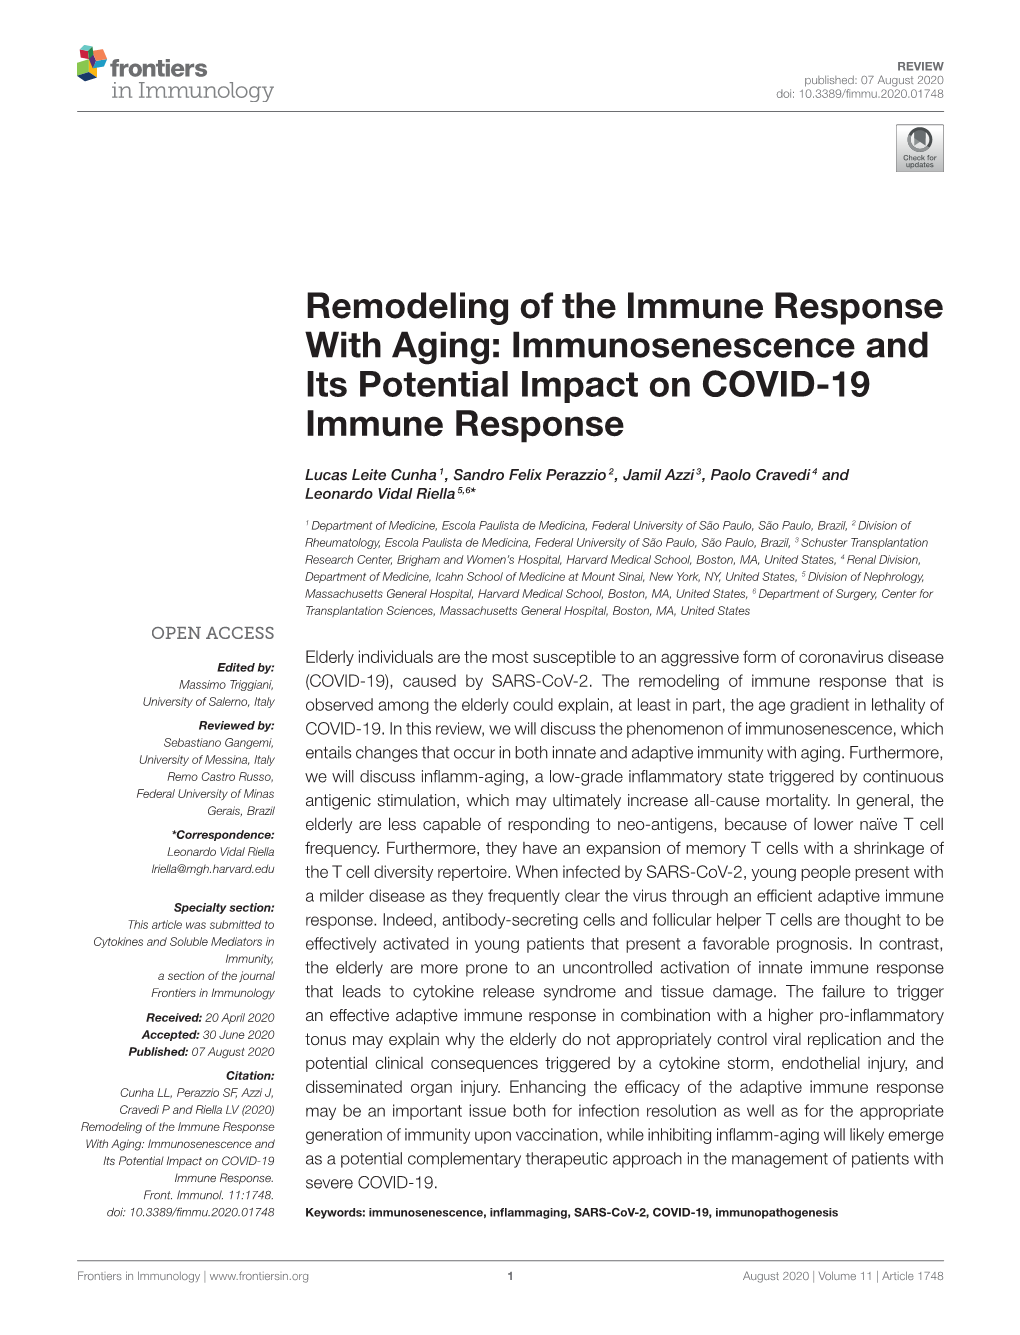 Remodeling of the Immune Response with Aging: Immunosenescence and Its Potential Impact on COVID-19 Immune Response